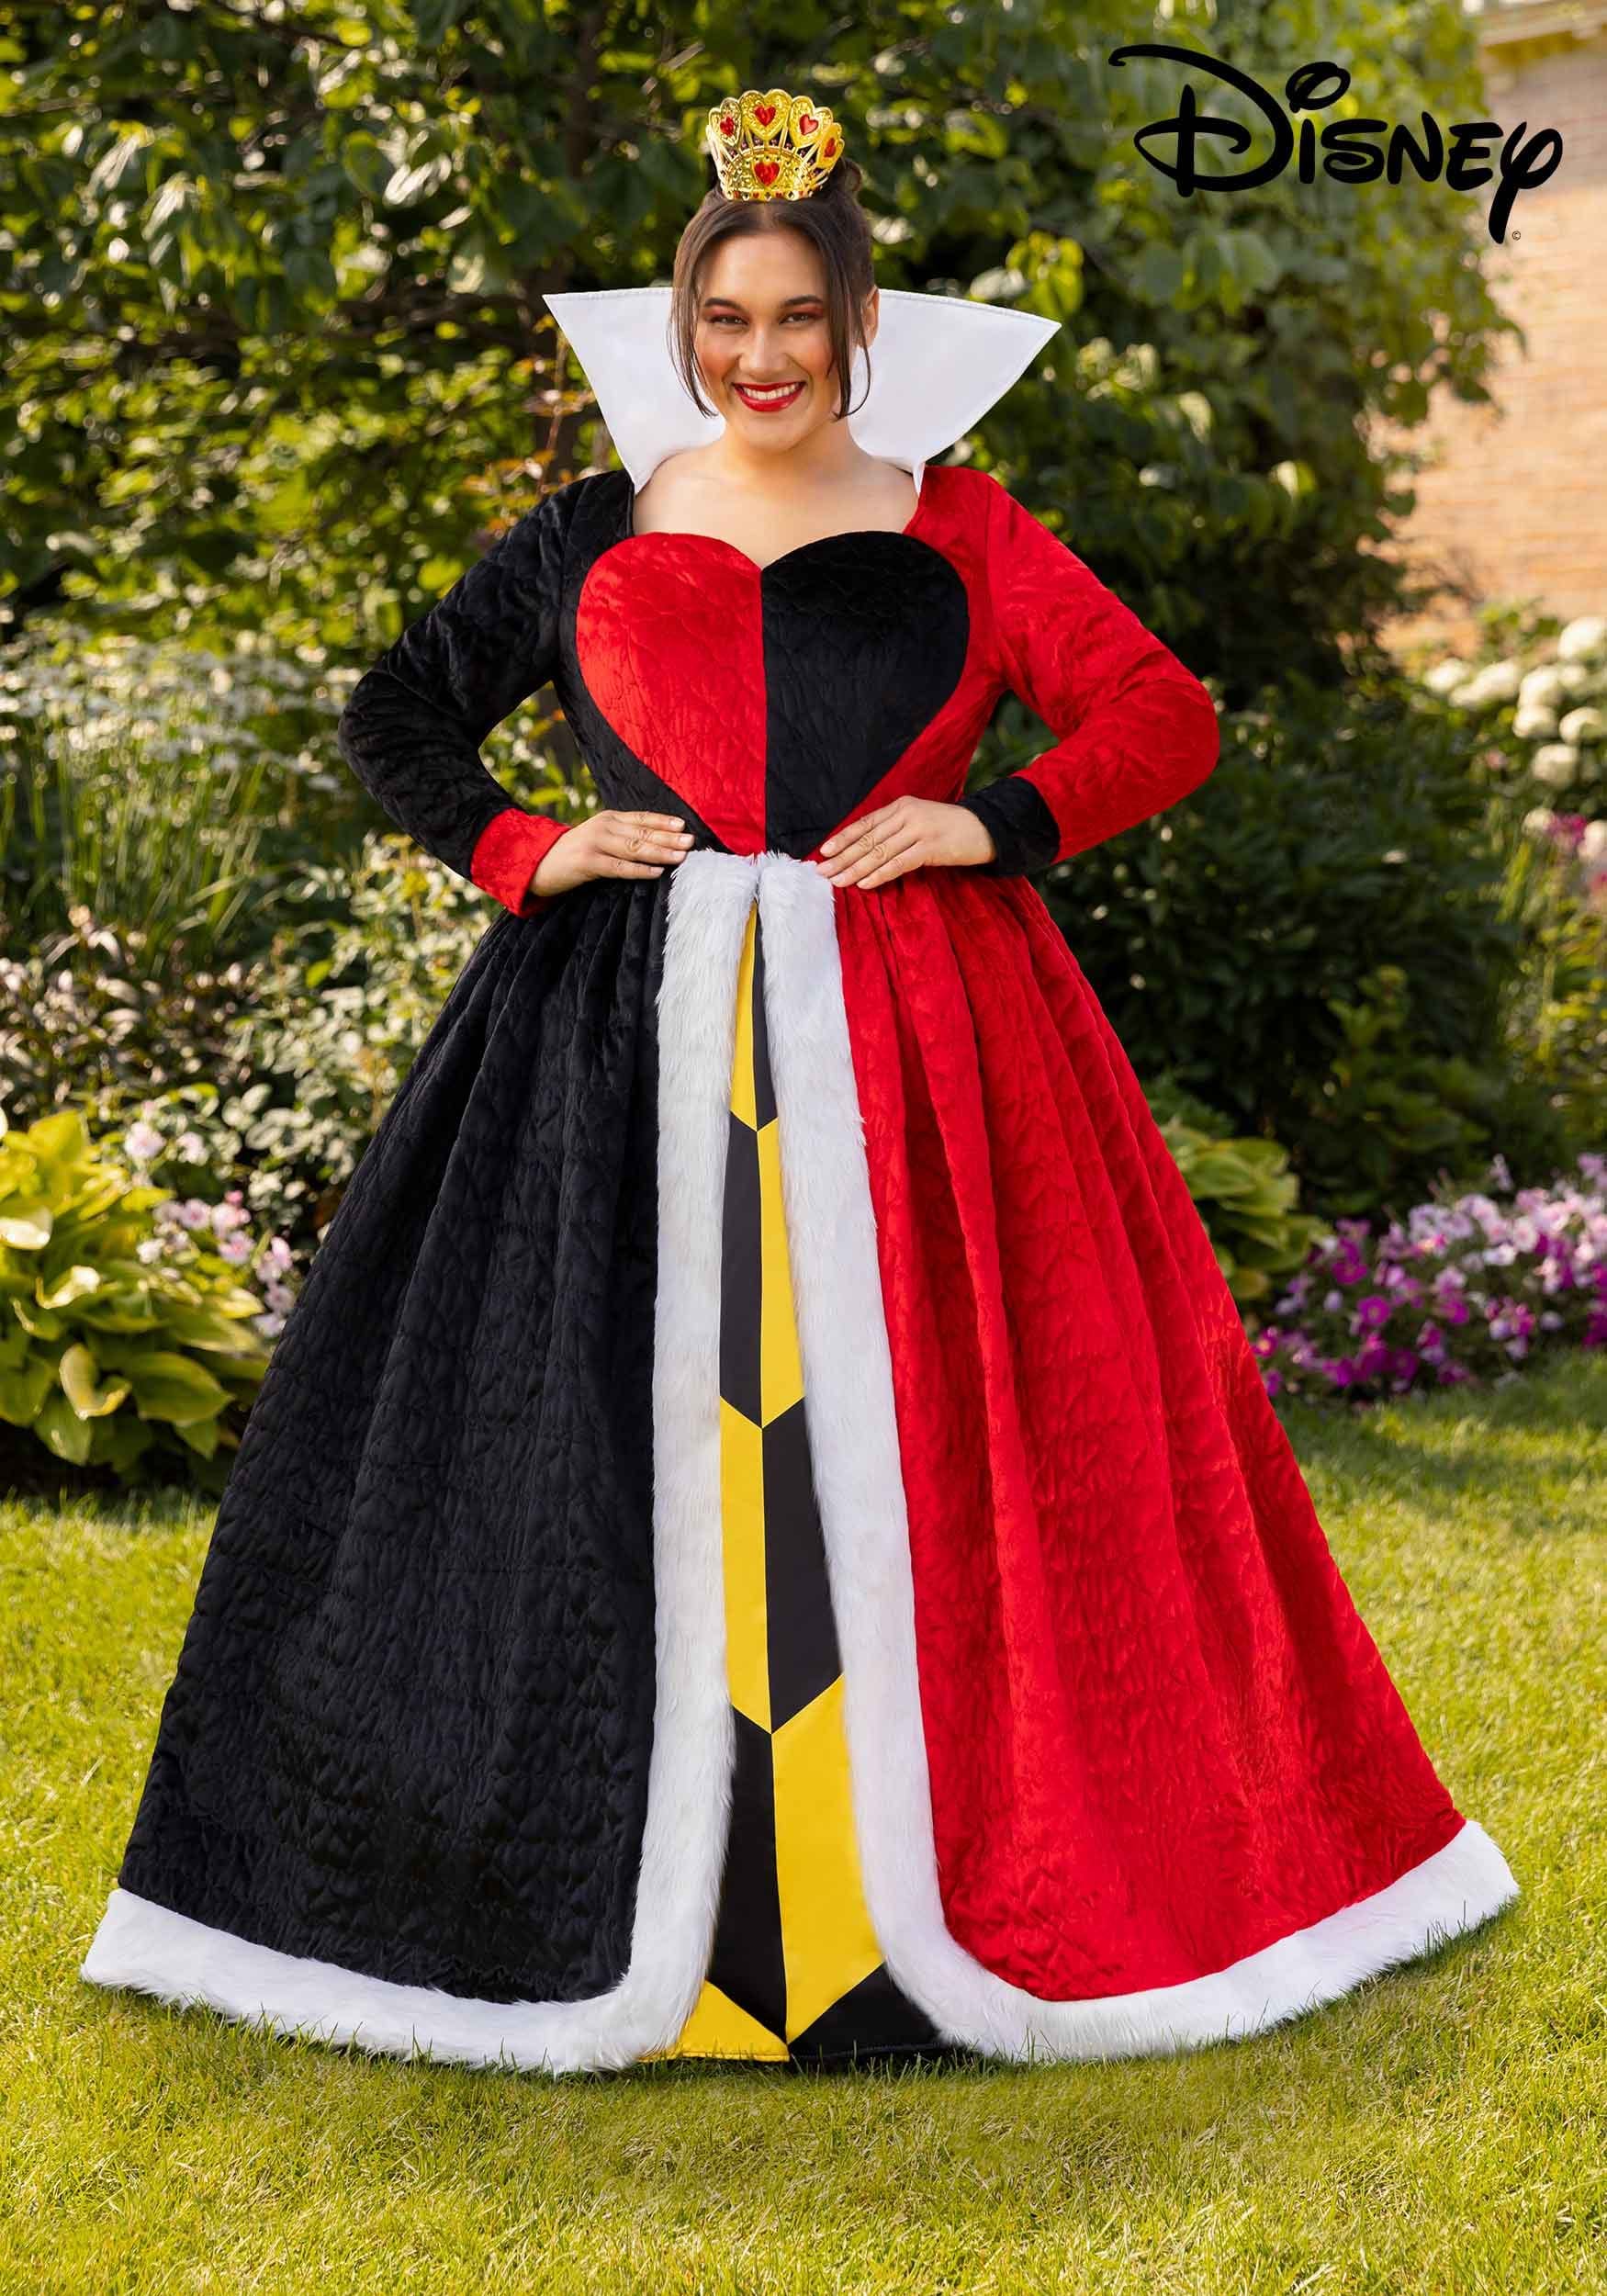 https://images.halloweencostumes.com/products/86110/1-1/plus-size-authentic-disney-queen-of-hearts-costume.jpg